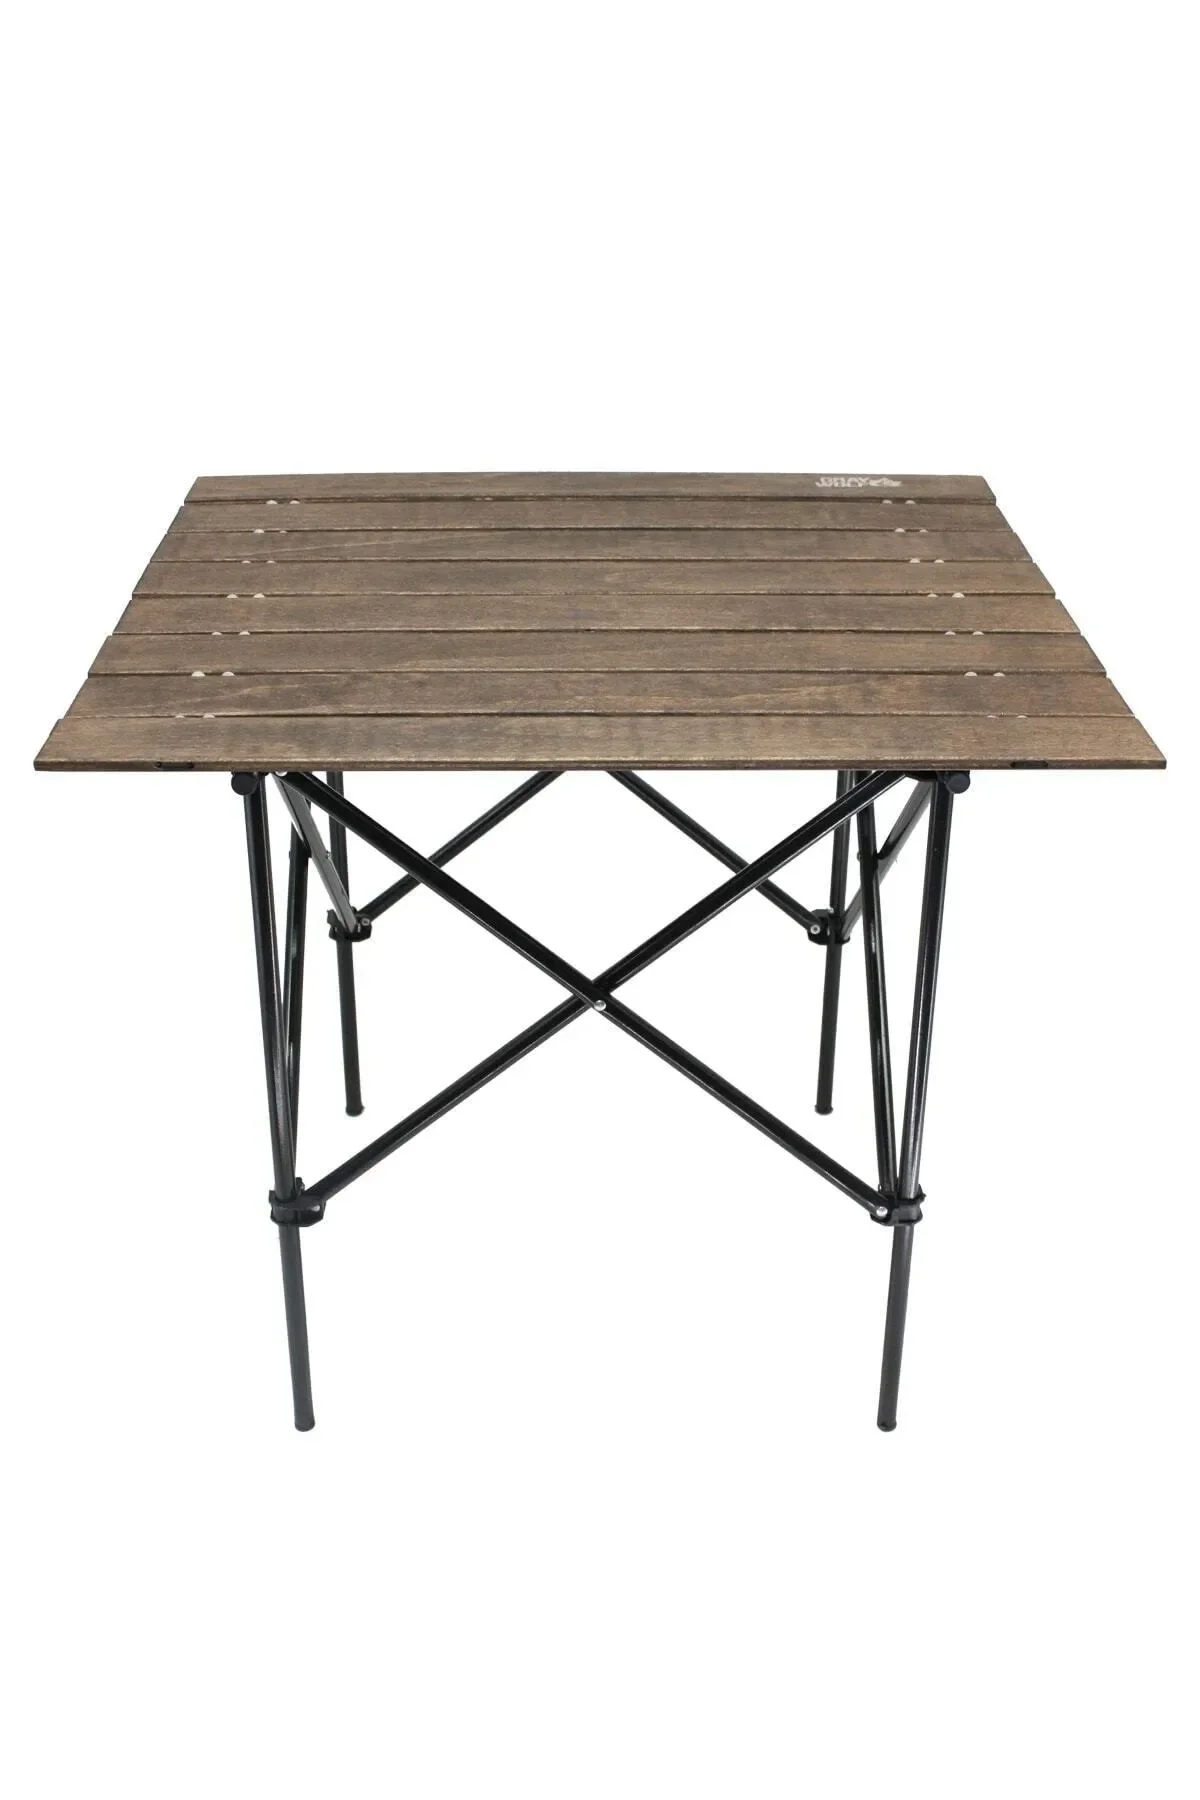 Foldable Wood Camping Table - Lightweight & Durable Outdoor Picnic Table for On-the-Go Adventures camping outdoor dining desk